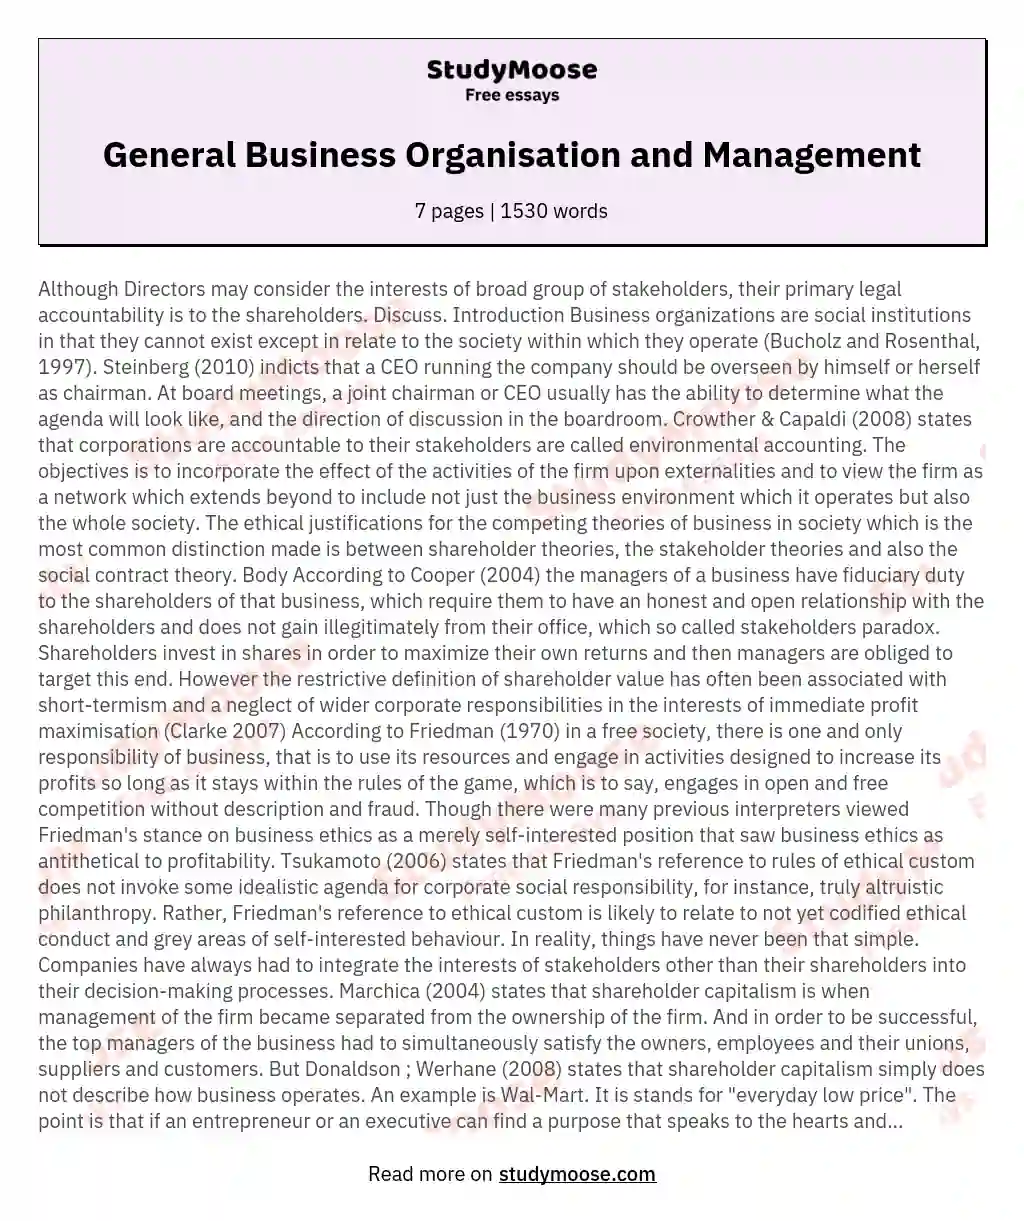 General Business Organisation and Management essay